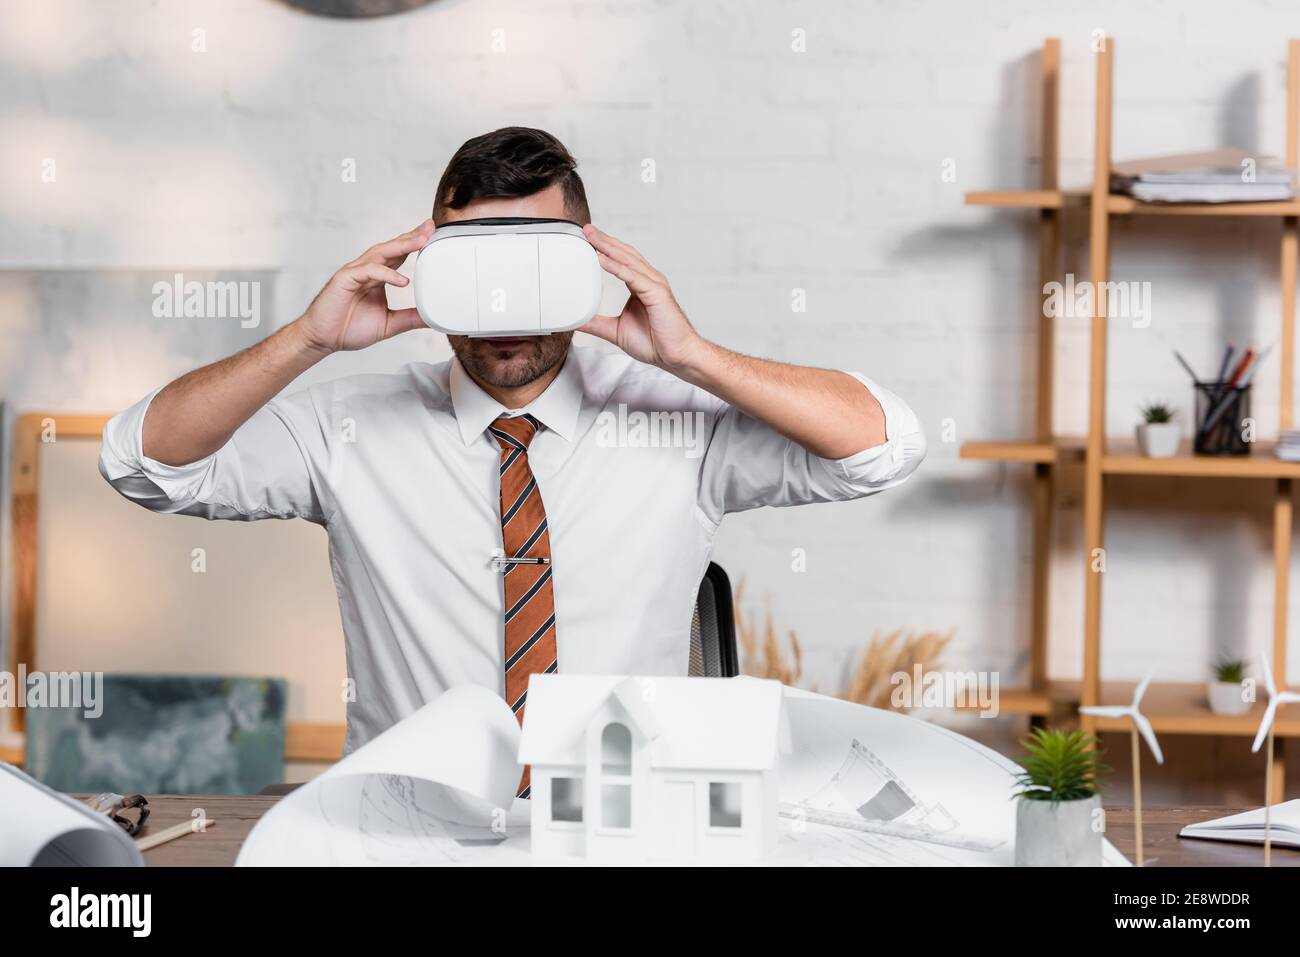 architect touching vr headset at workplace near blueprint and house model Stock Photo